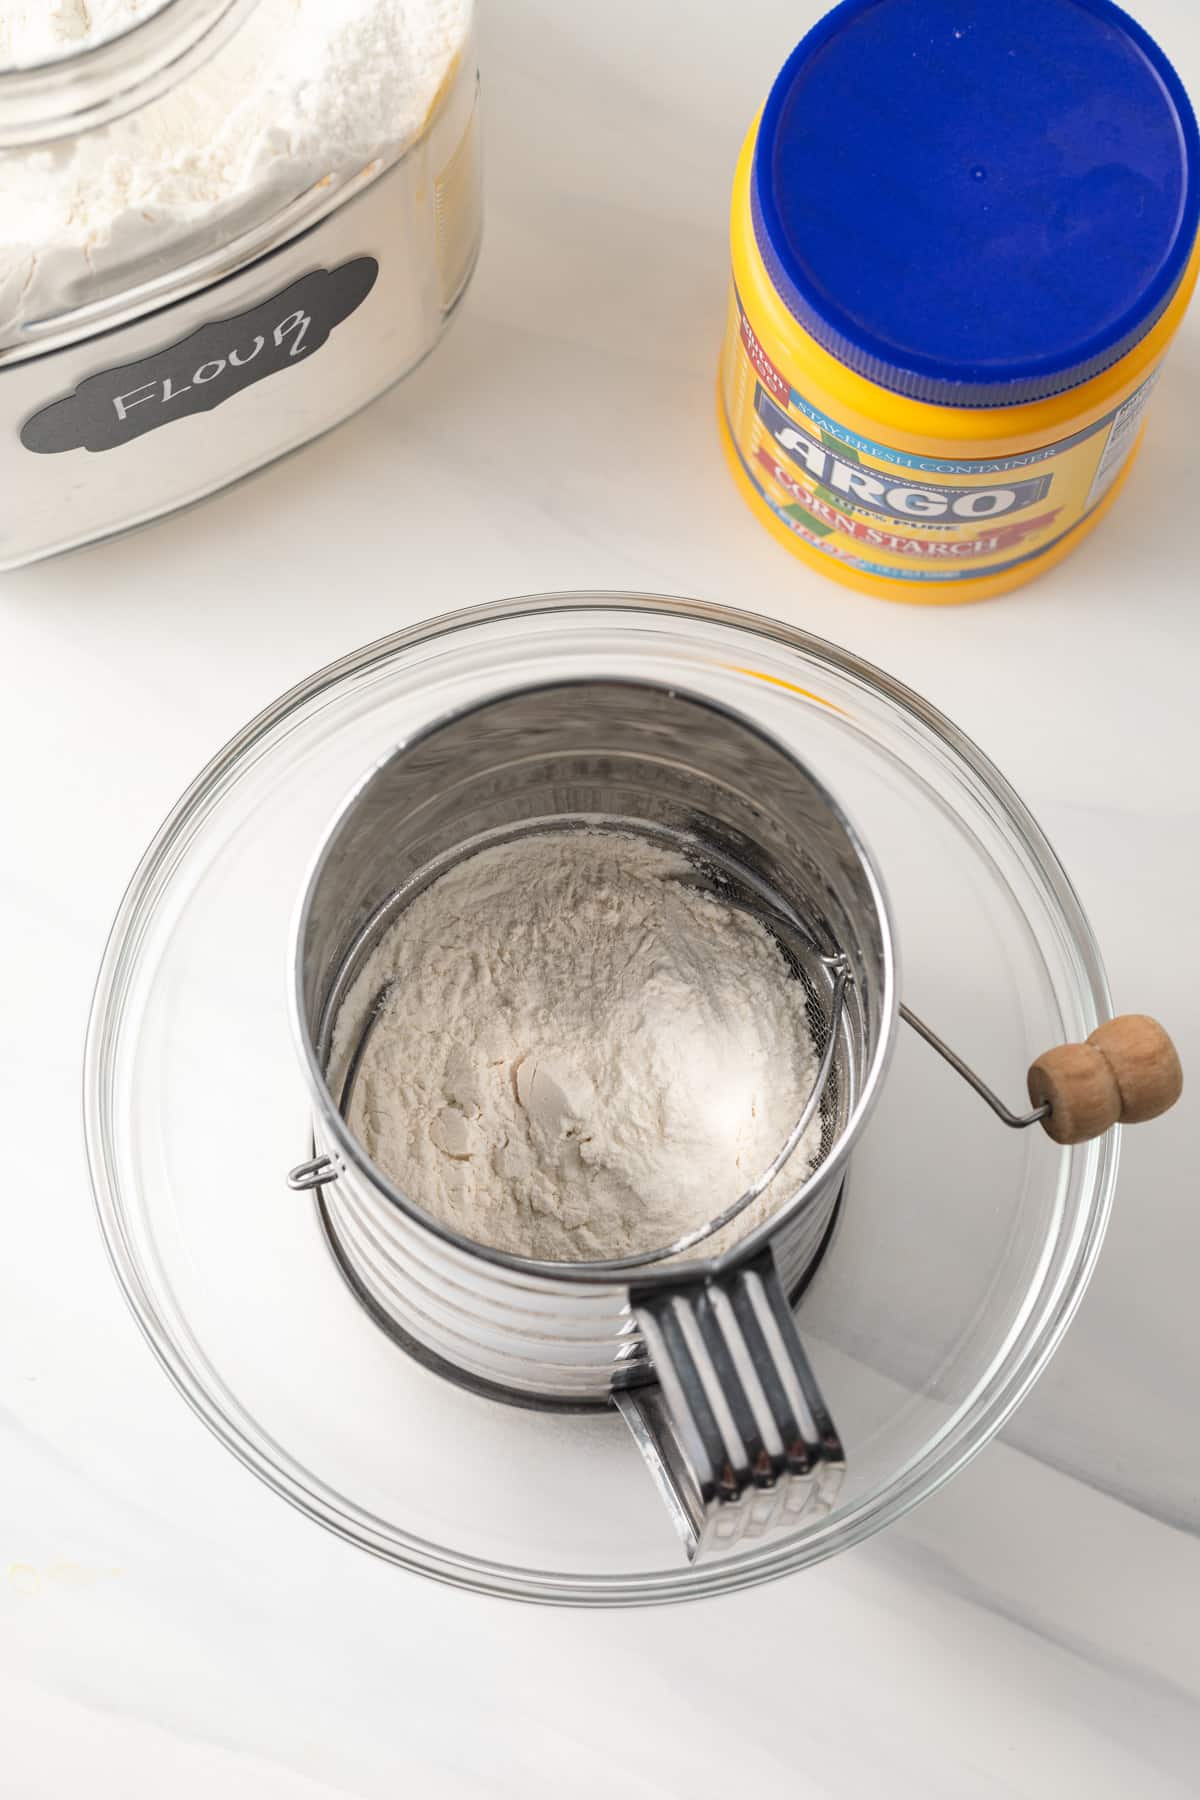 Homemade cake flour in a sifter.